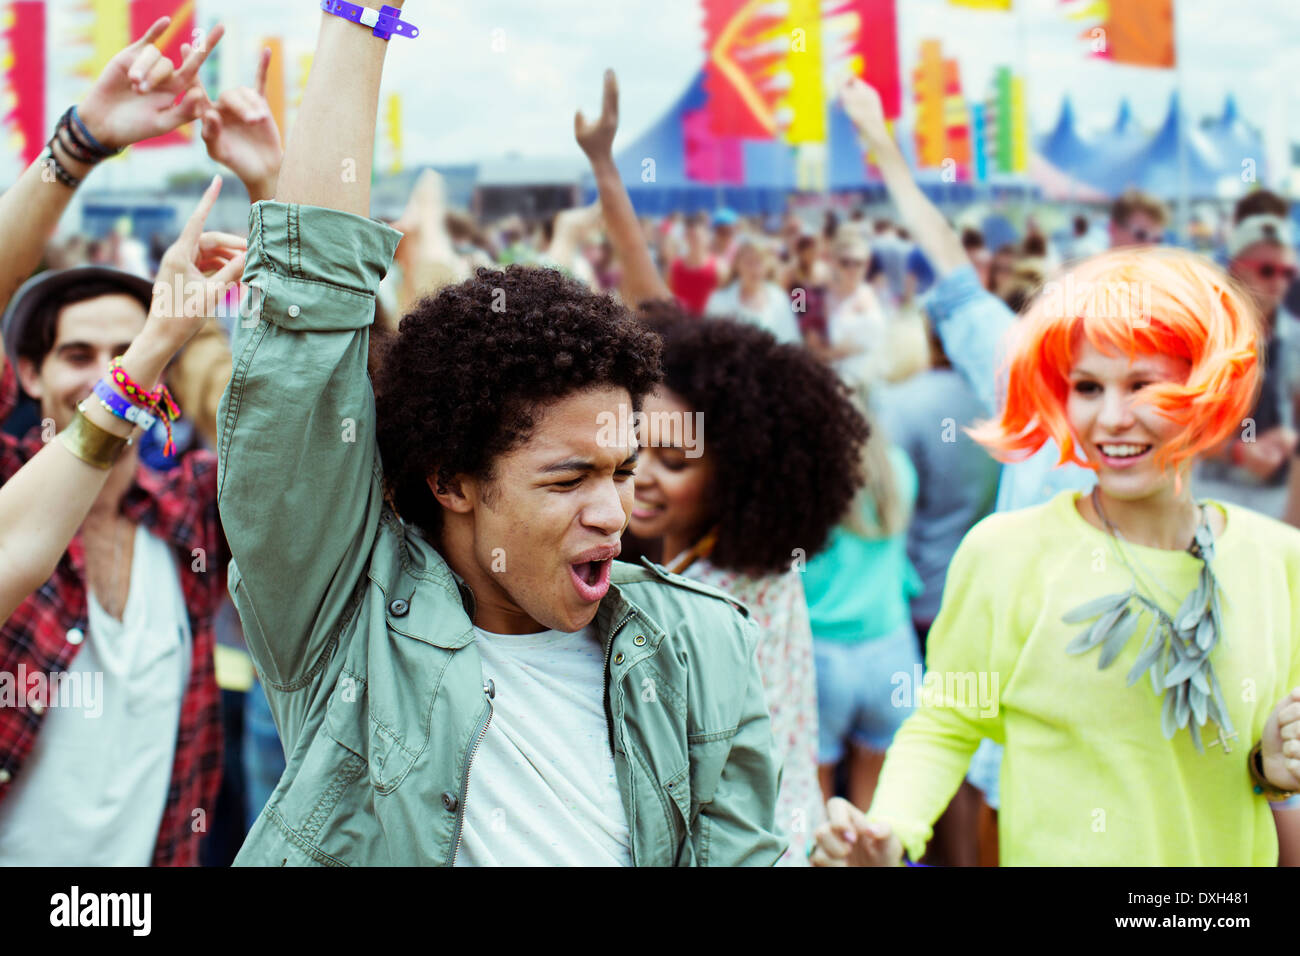 Friends dancing and cheering at music festival Stock Photo